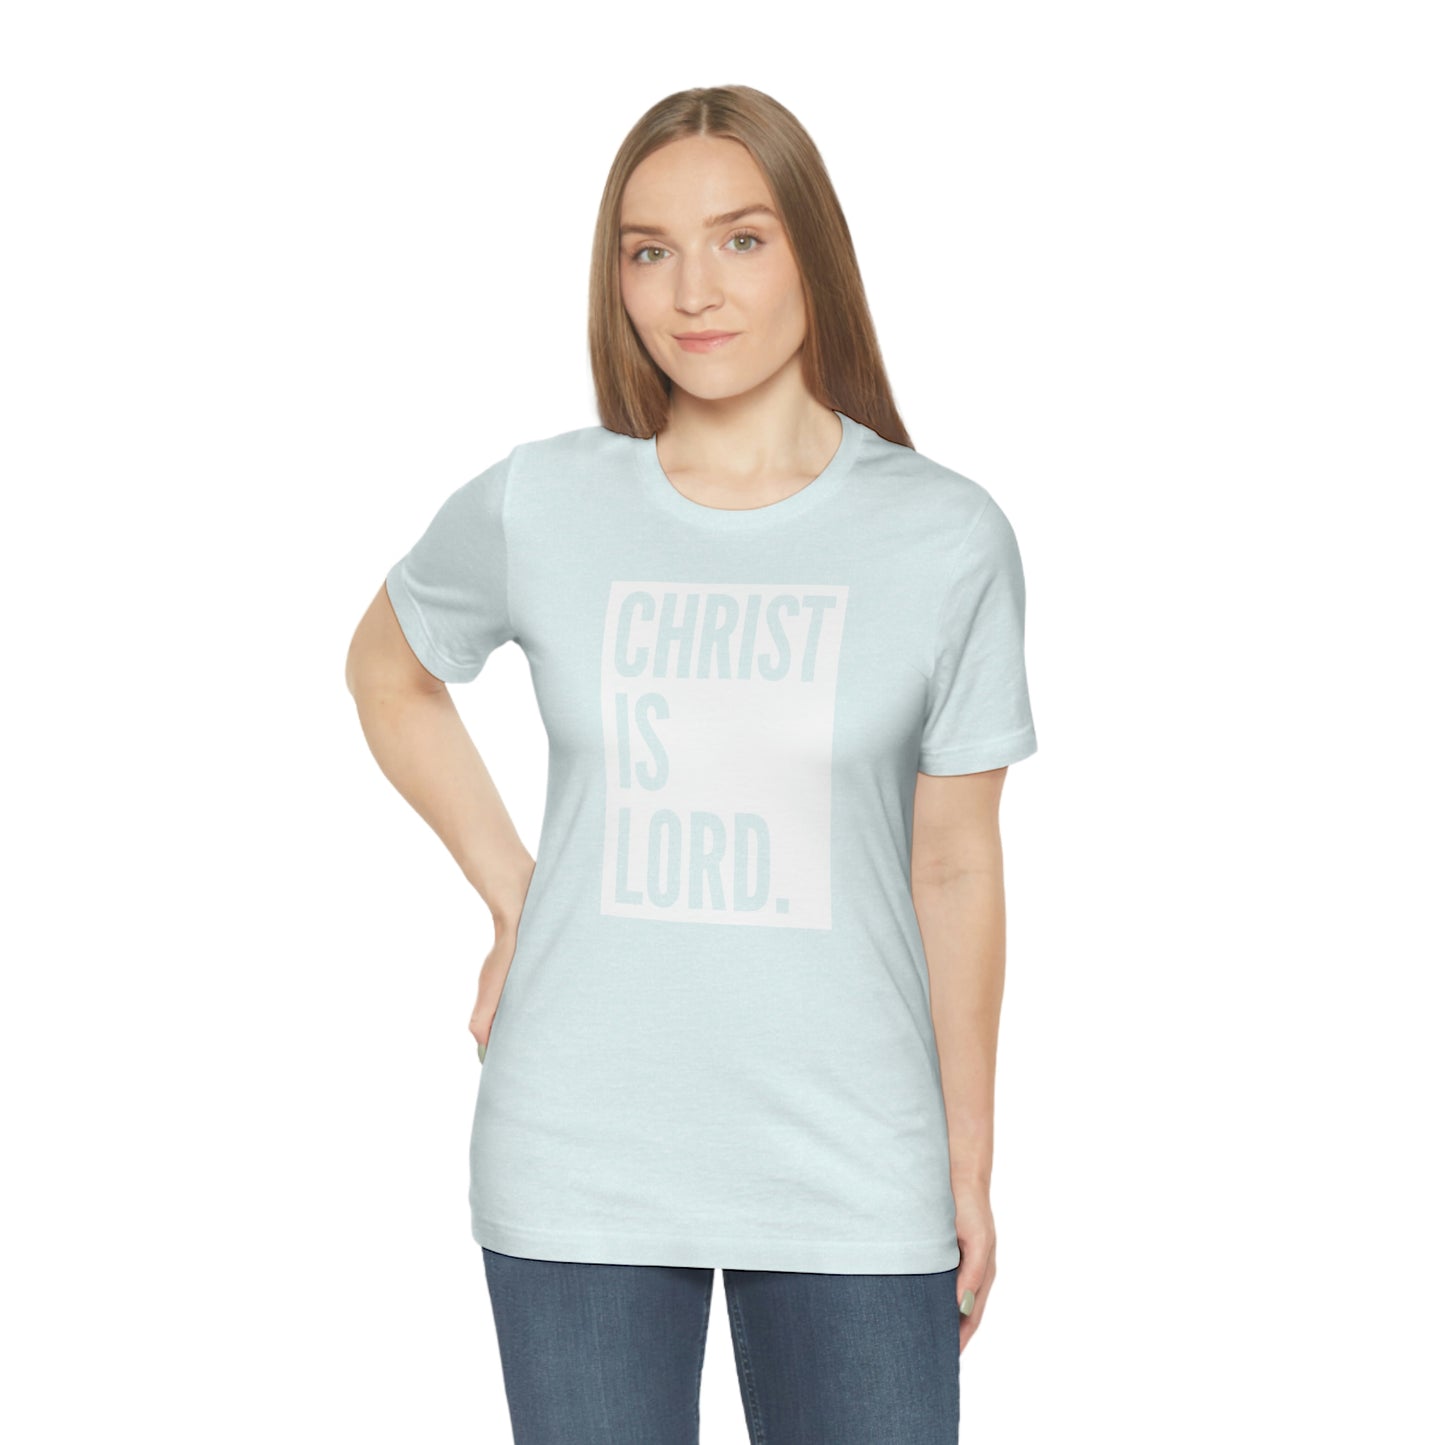 Gospel Affiliated Christ Is Lord Unisex Jersey Short Sleeve Tee